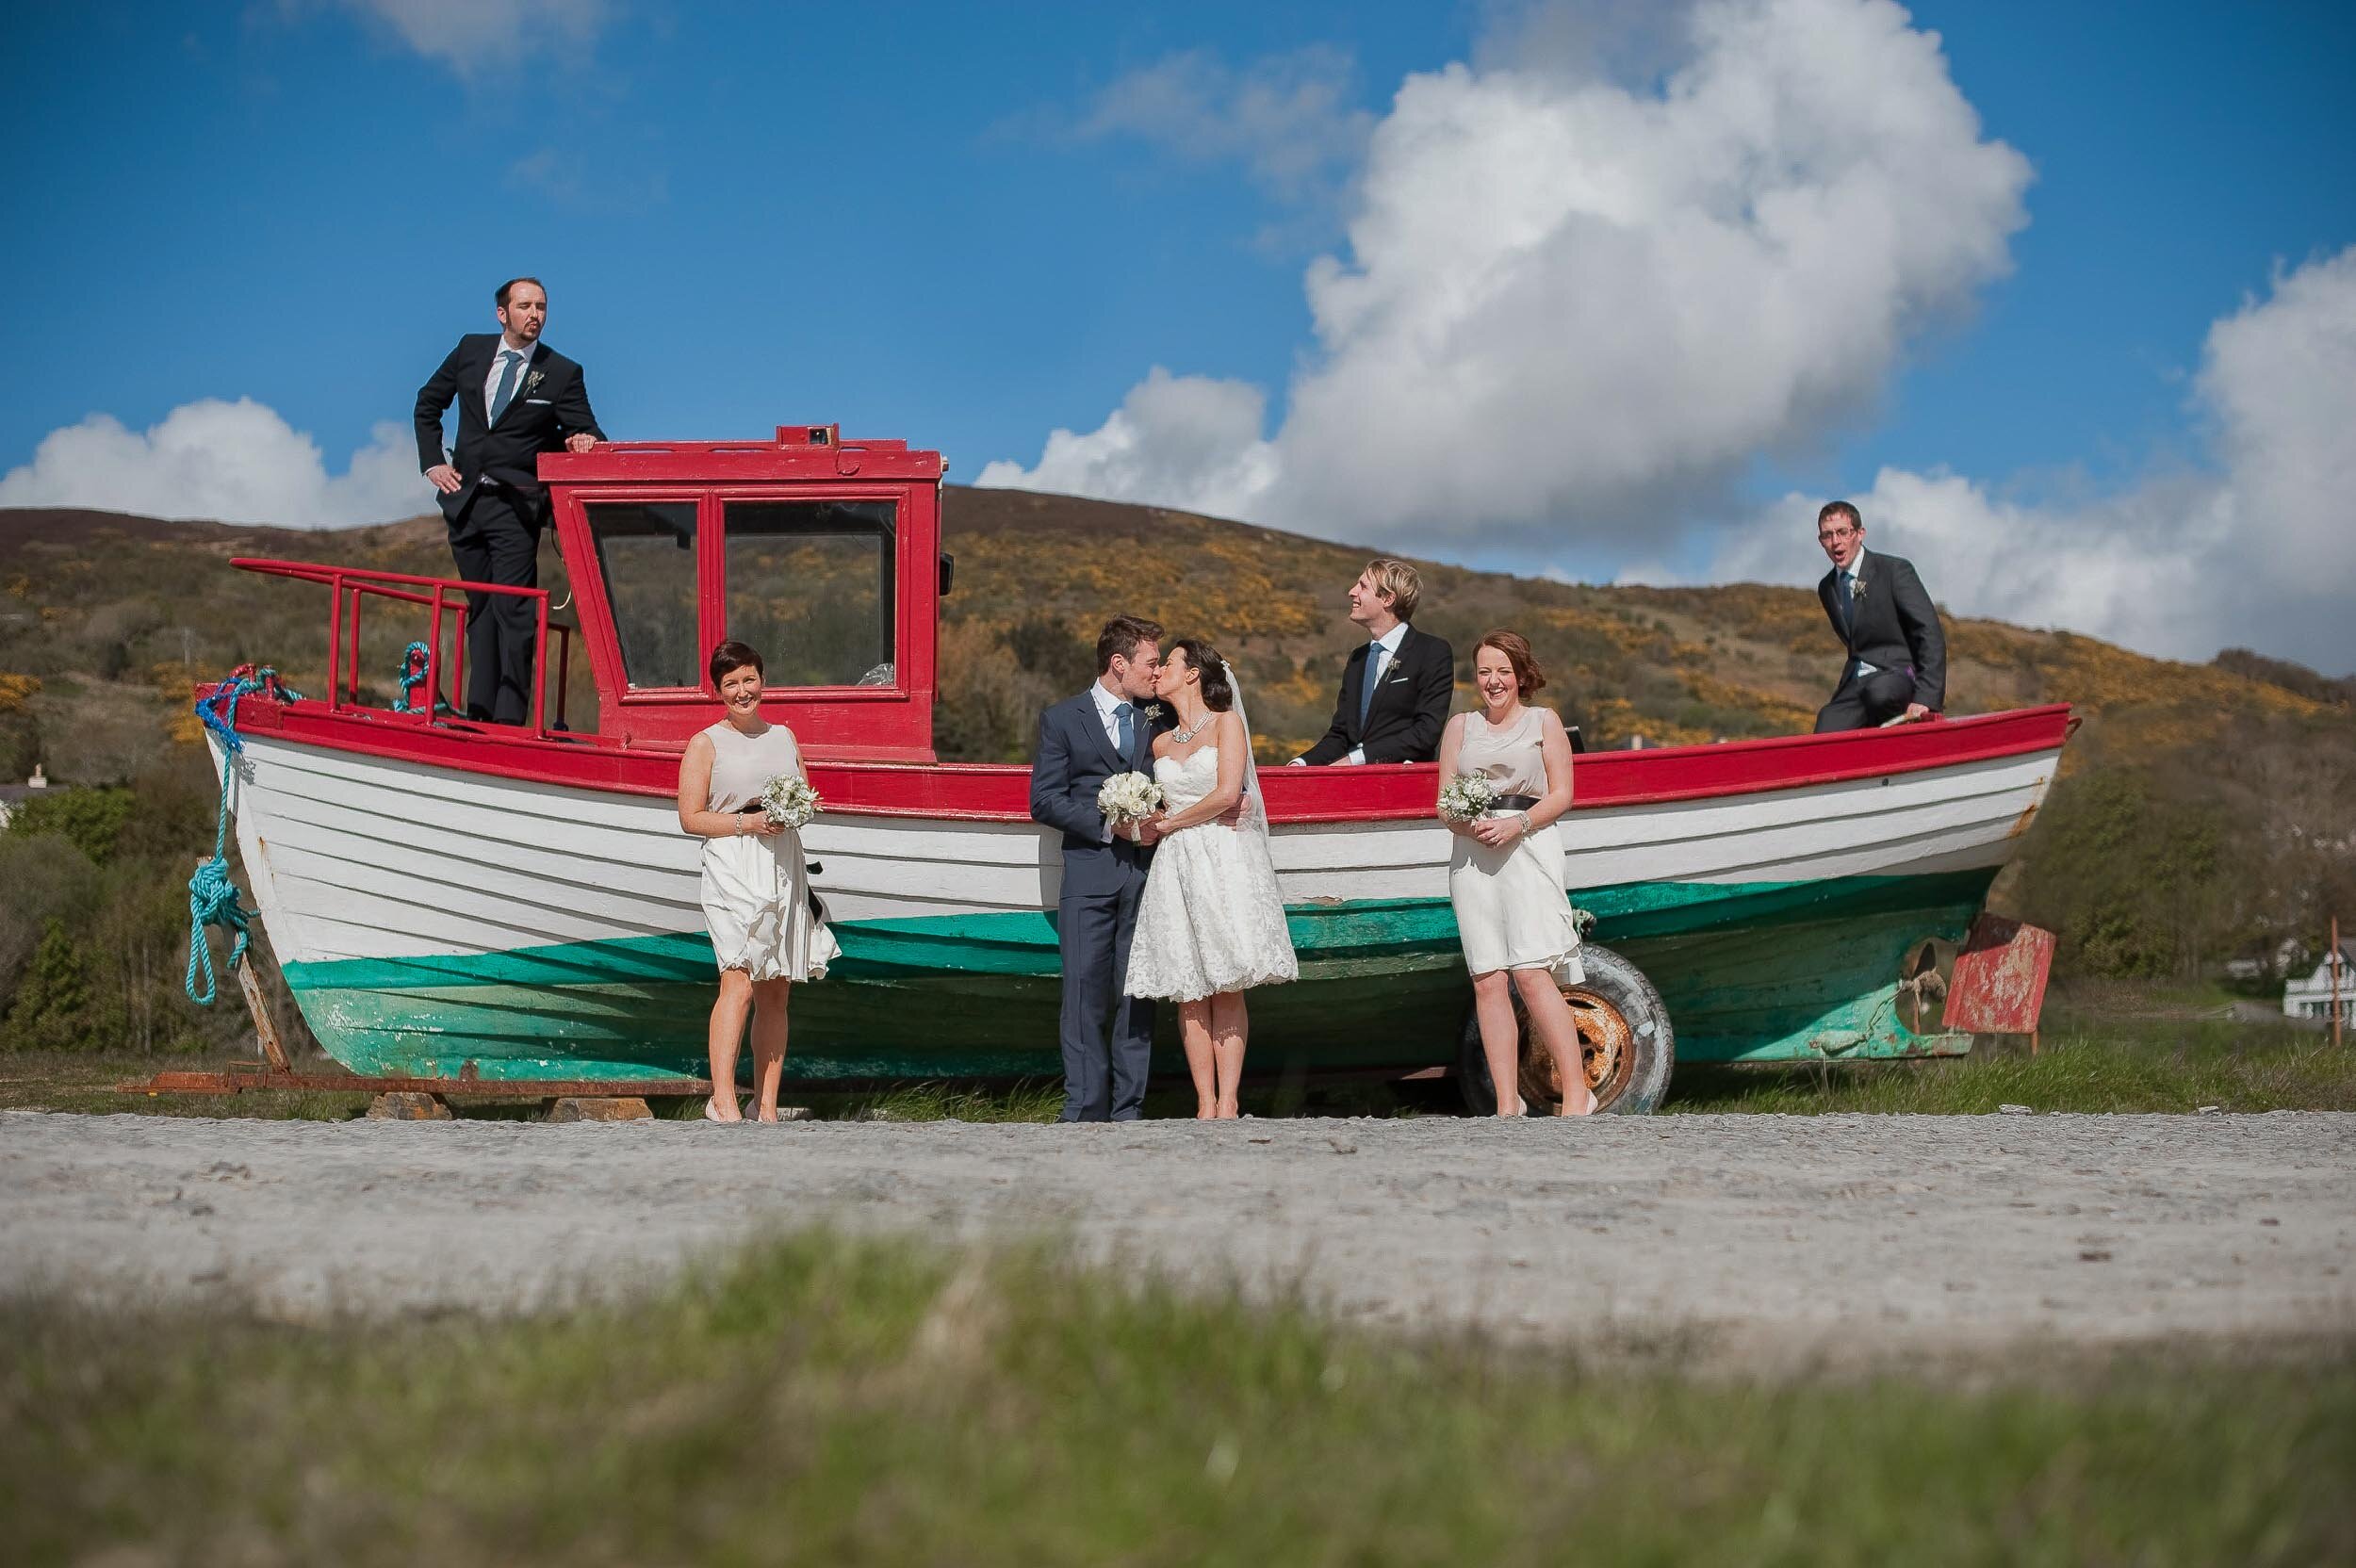 Bridal party pictured in County Donegal